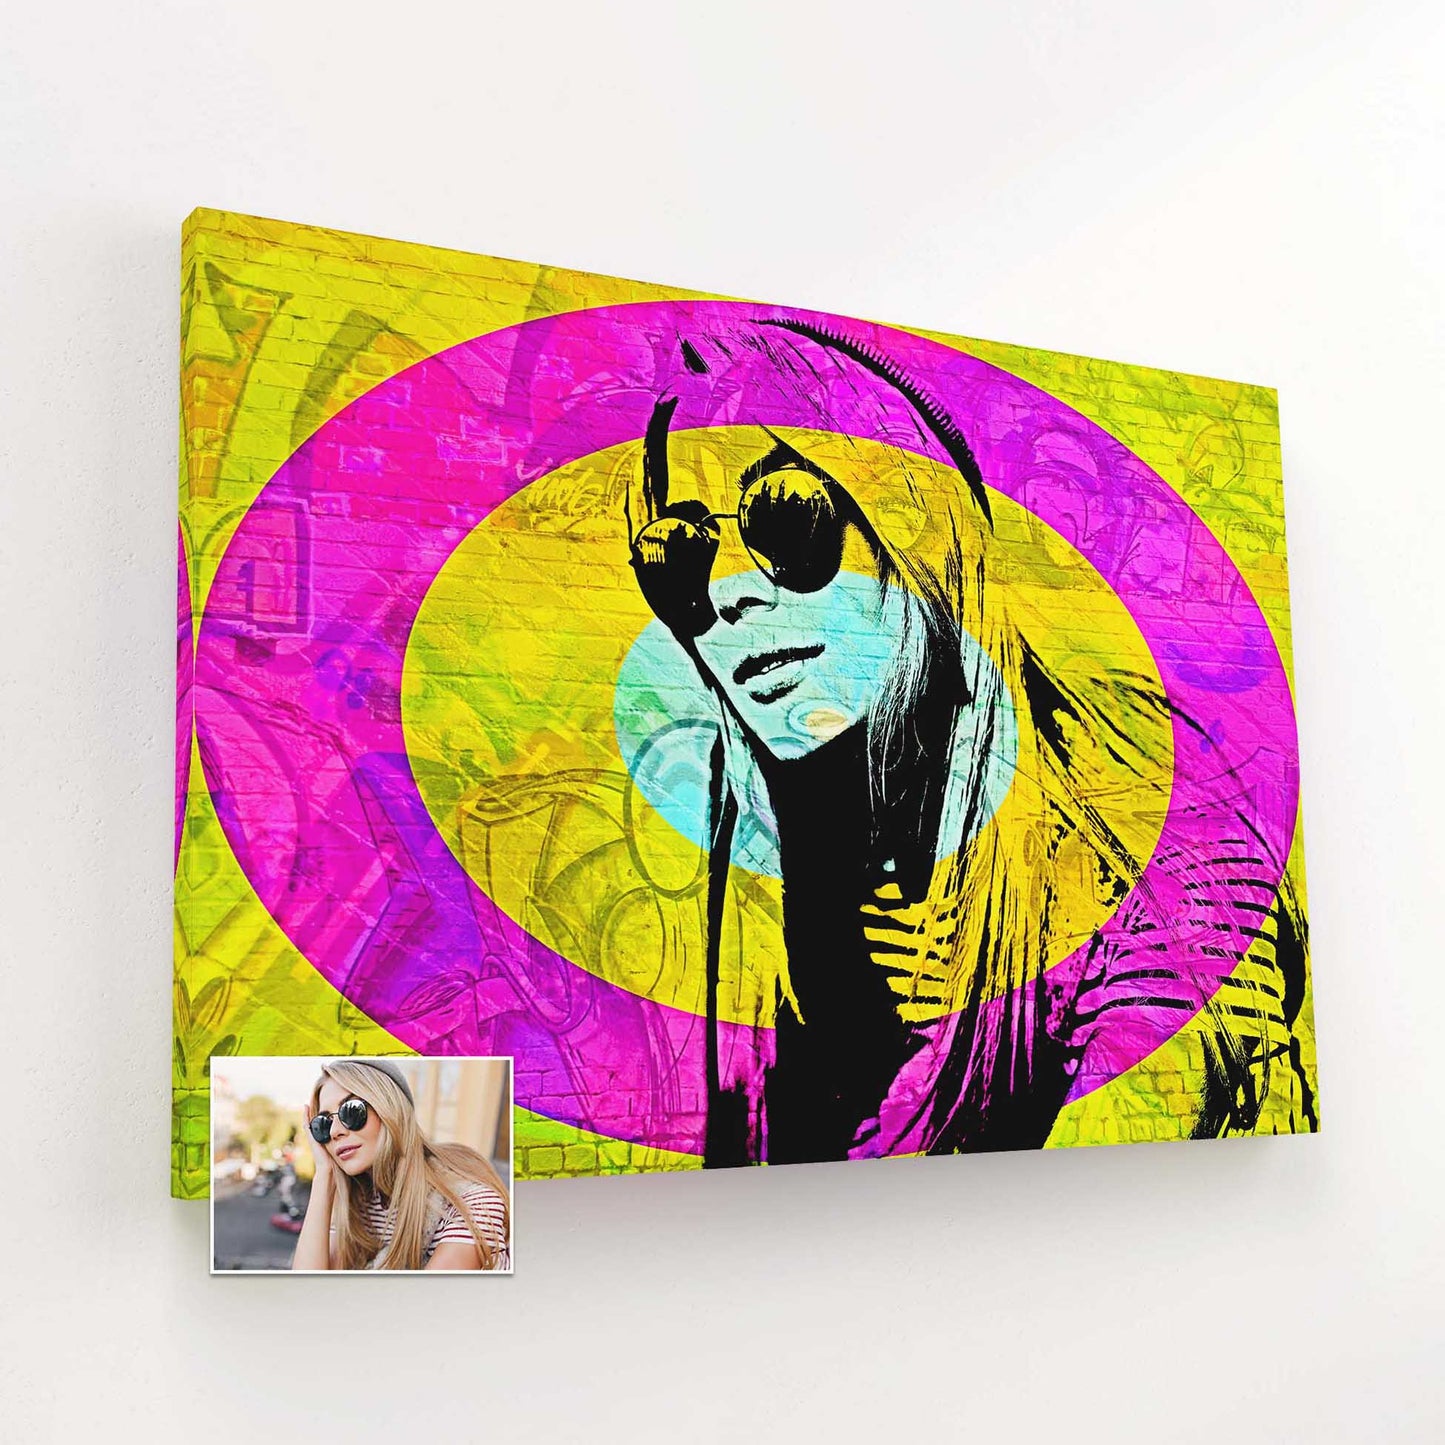 Add a touch of urban flair to your space with our Personalised Graffiti Street Art Canvas. With its fun, colorful, and exciting designs, this canvas captures the essence of street art. Handmade on woven canvas and printed from your photo